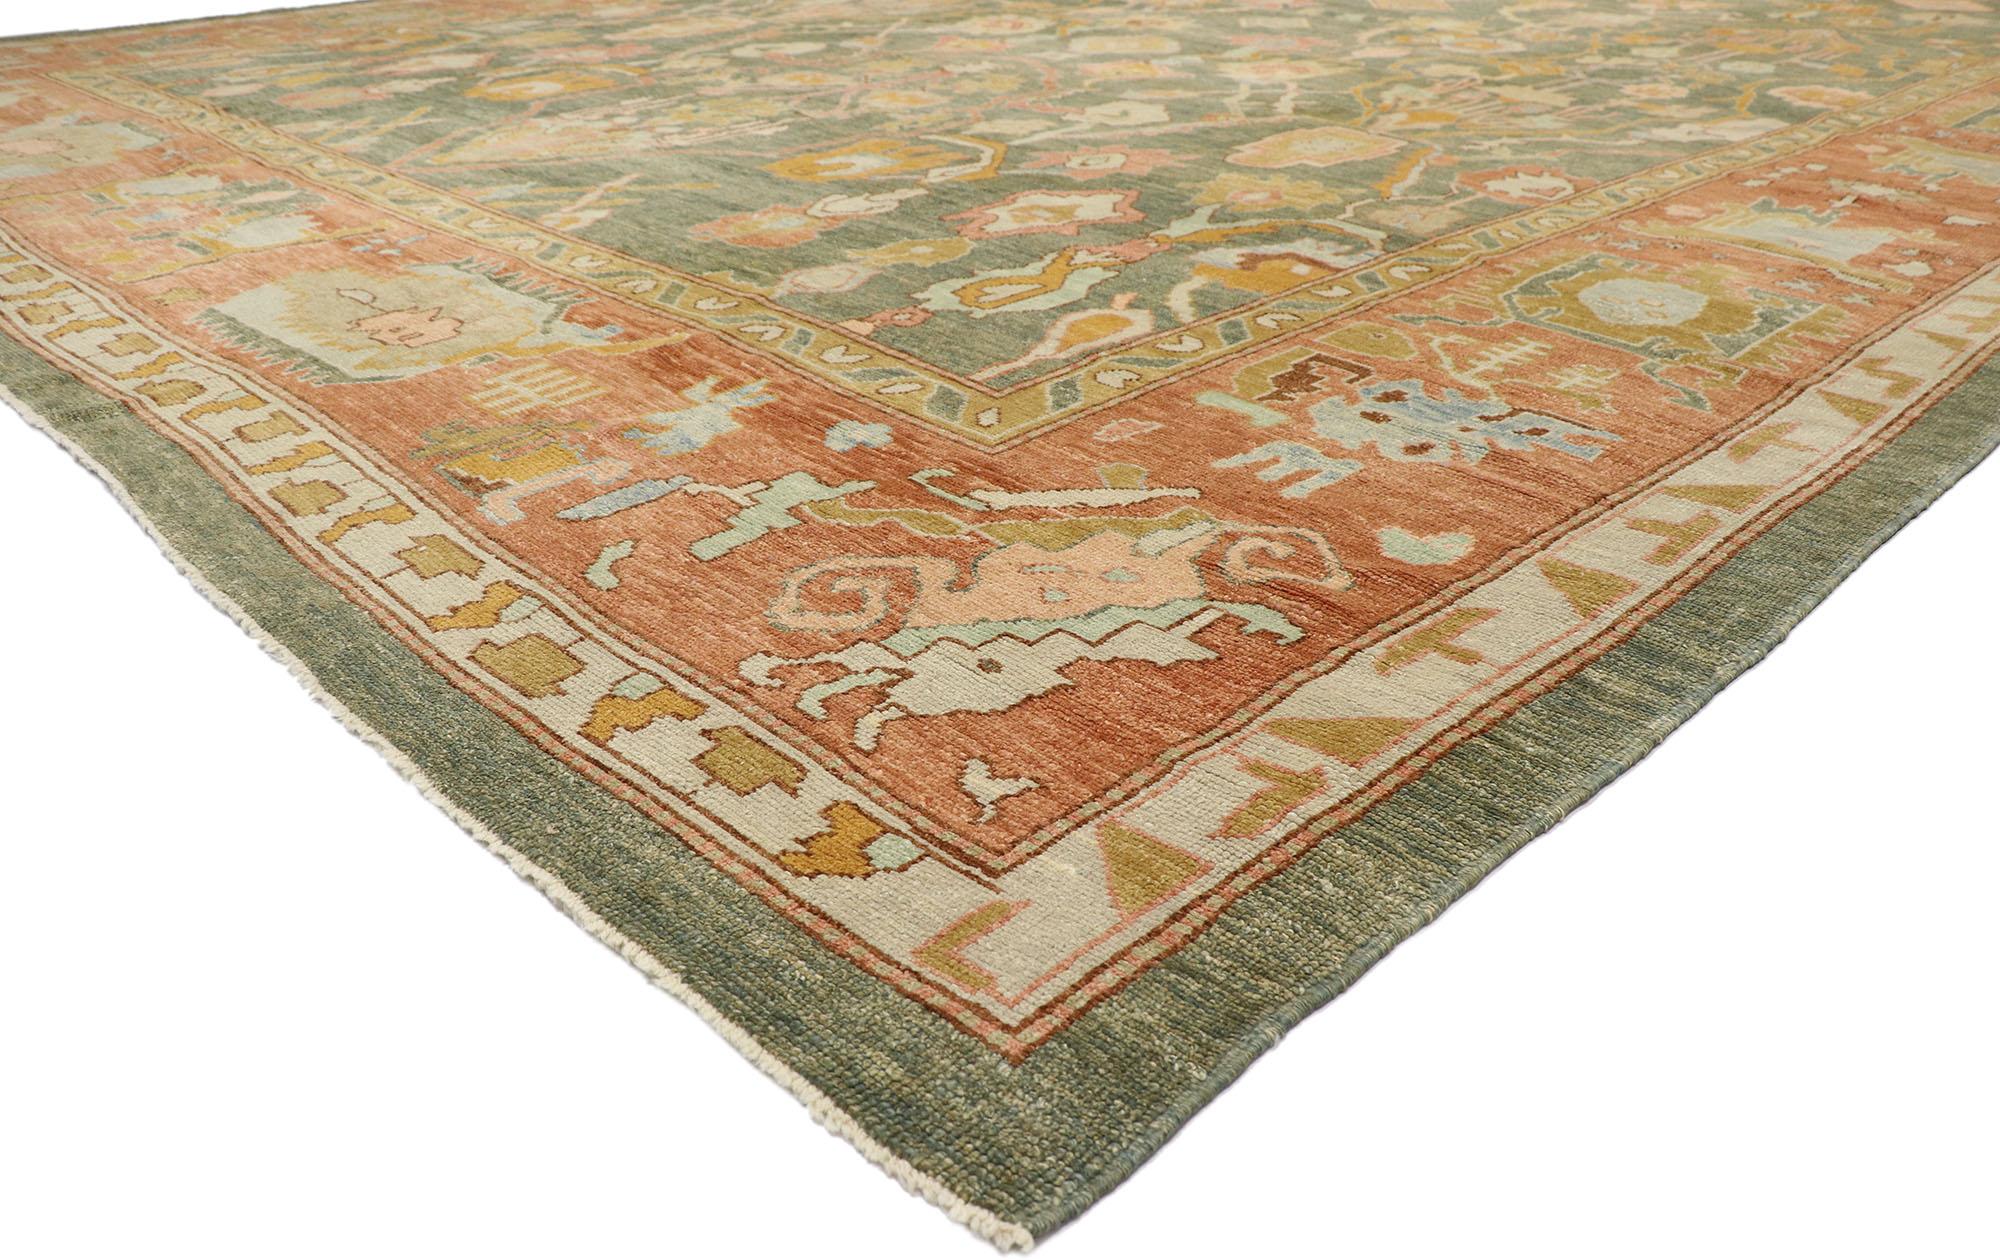 53454 Modern Oushak Turkish Rug, 16'08 x 24'03. Drawing inspiration from Spanish-style architecture and eclectic refinement, this hand-knotted wool Turkish Oushak rug stands as a testament to woven beauty. Embracing the principles of Biophilic